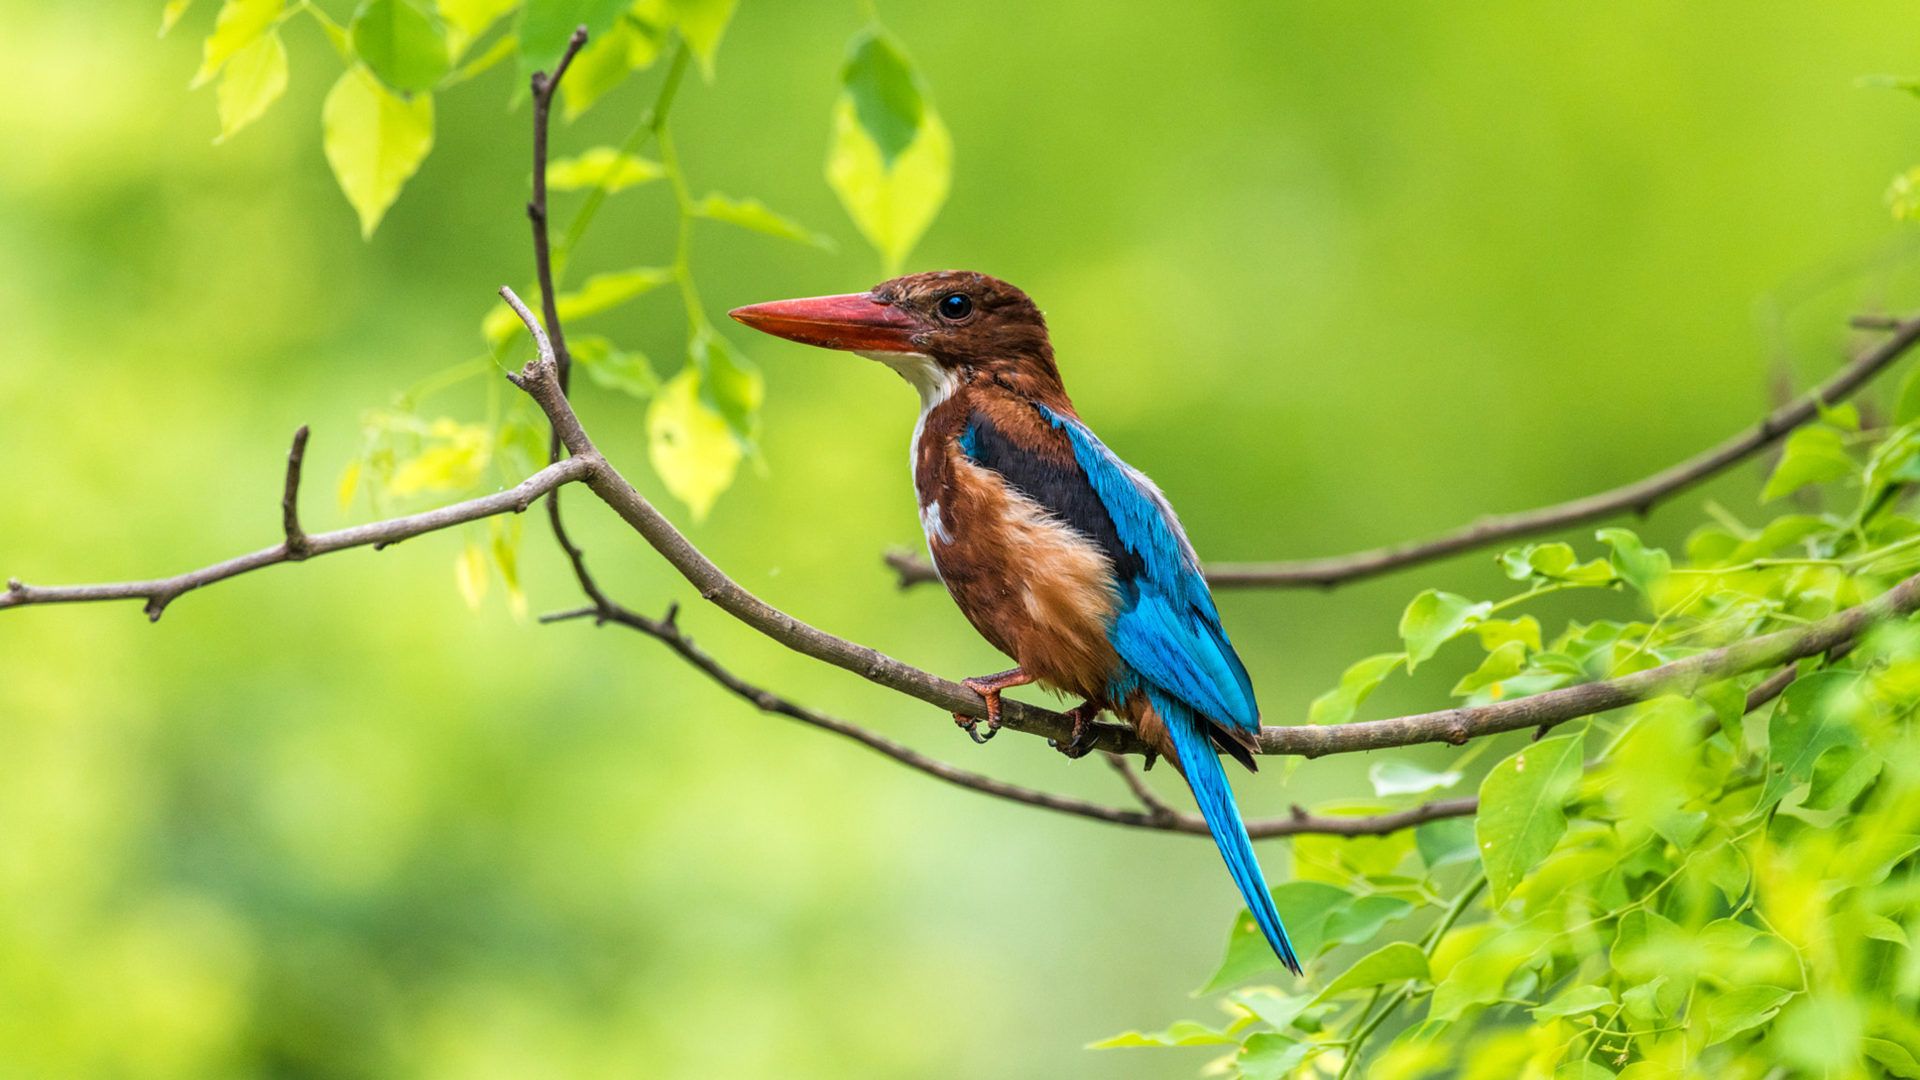 Birds Kingfisher Hues Of A Hunter From India 4k Ultra HD Tv